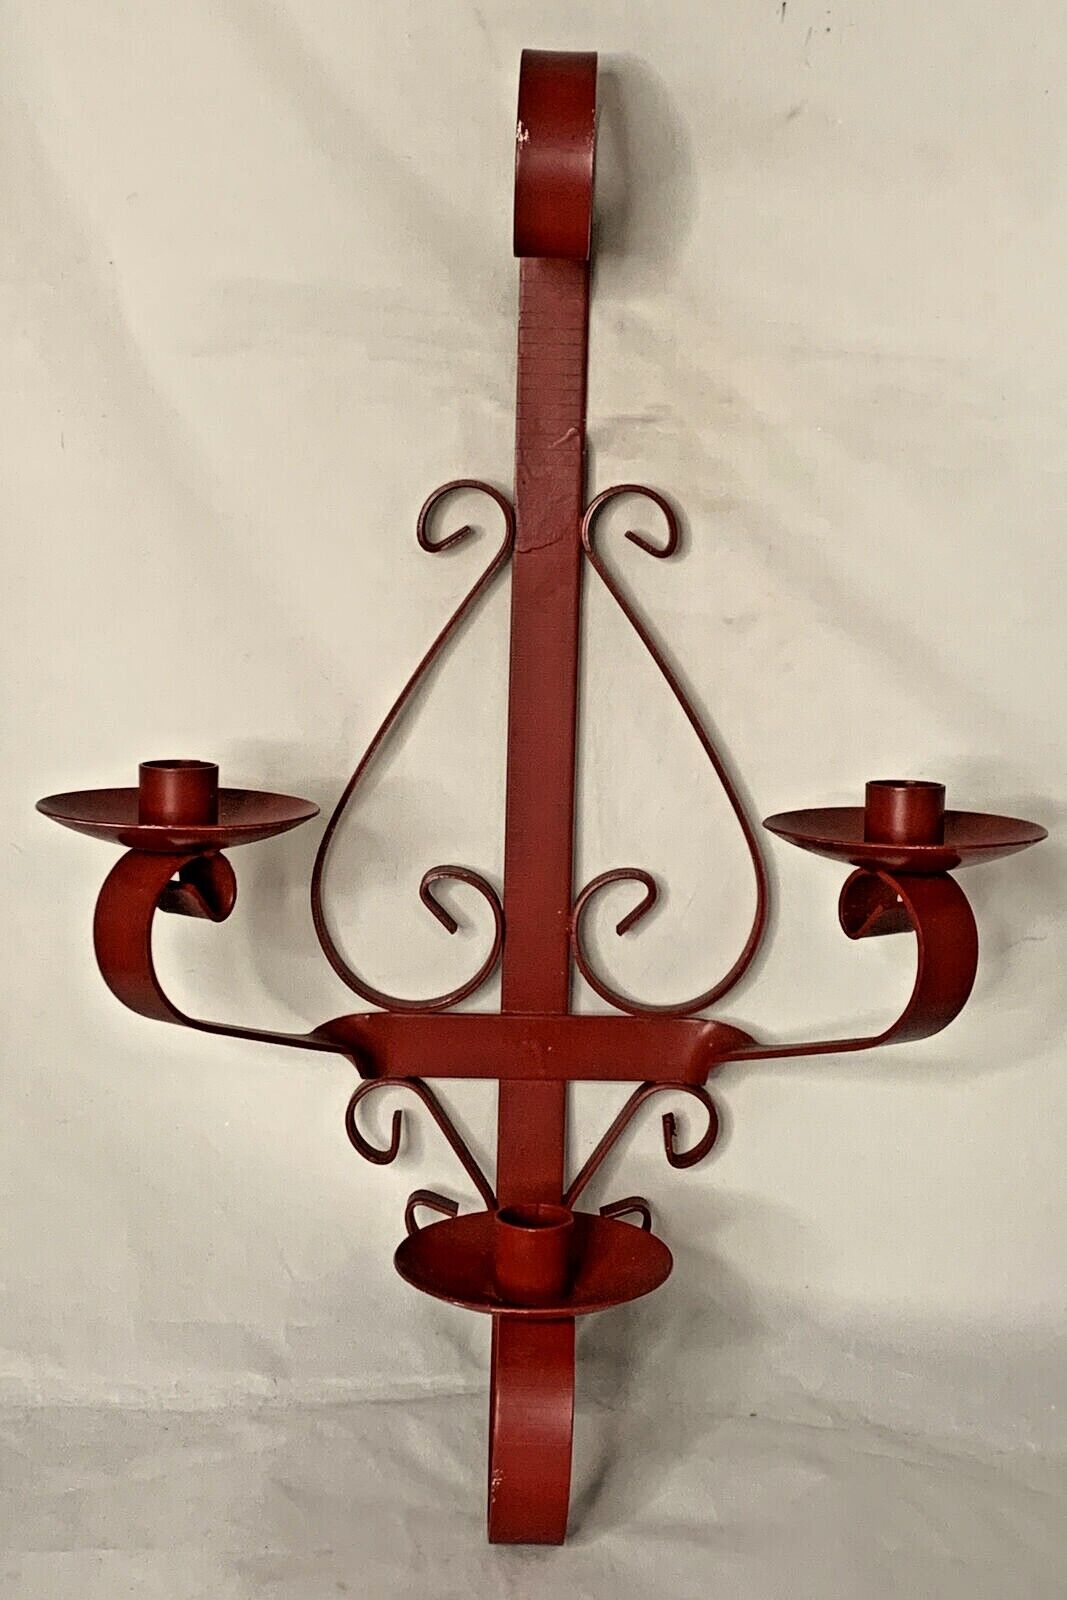 Vintage WROUGHT IRON Hanging Triple Candle Holder Brick Red 18.5” tall x 13” W